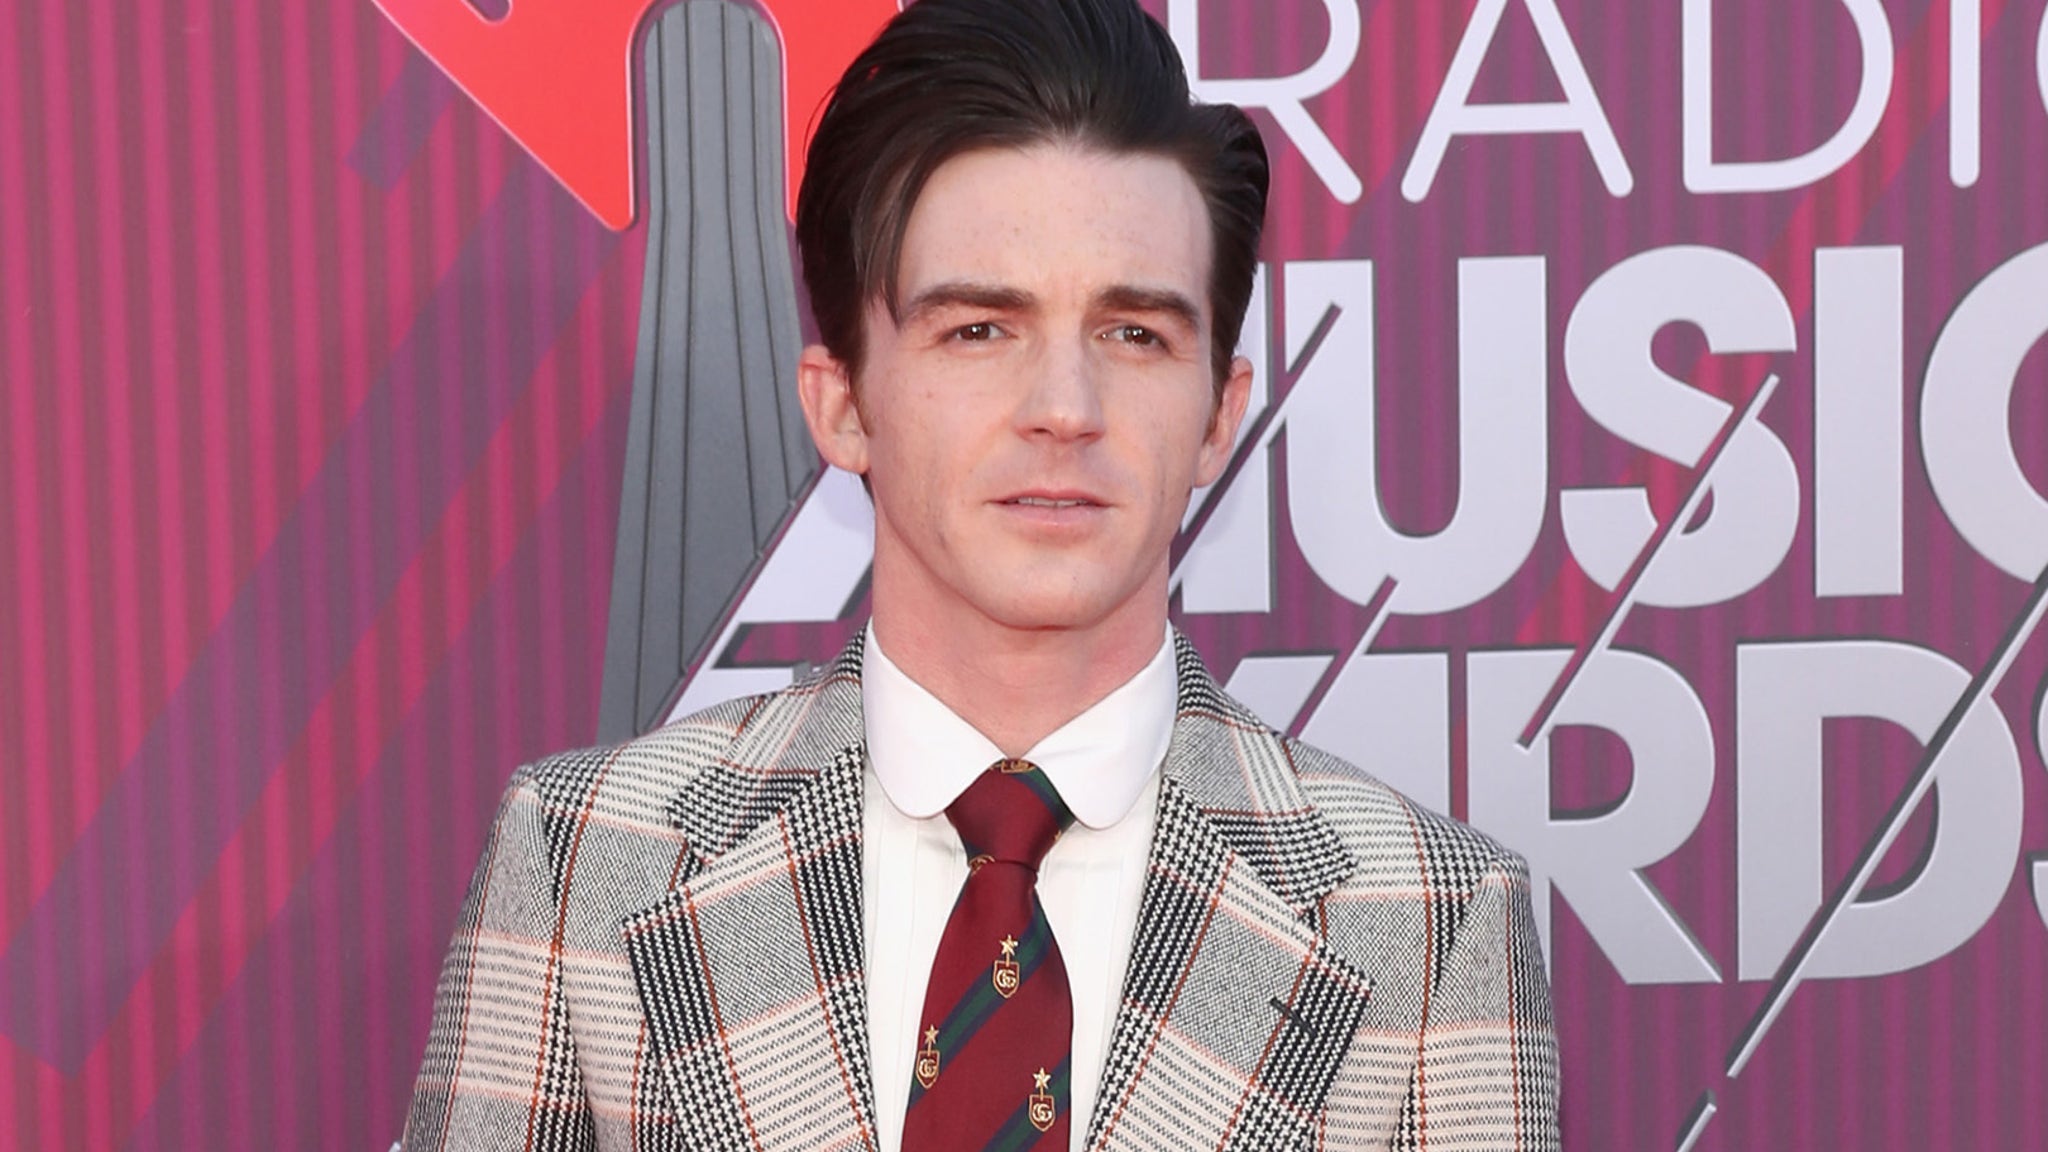 Drake Bell on Why He Finally Shared His Story, 'Pretty Empty' Response from Nickelodeon